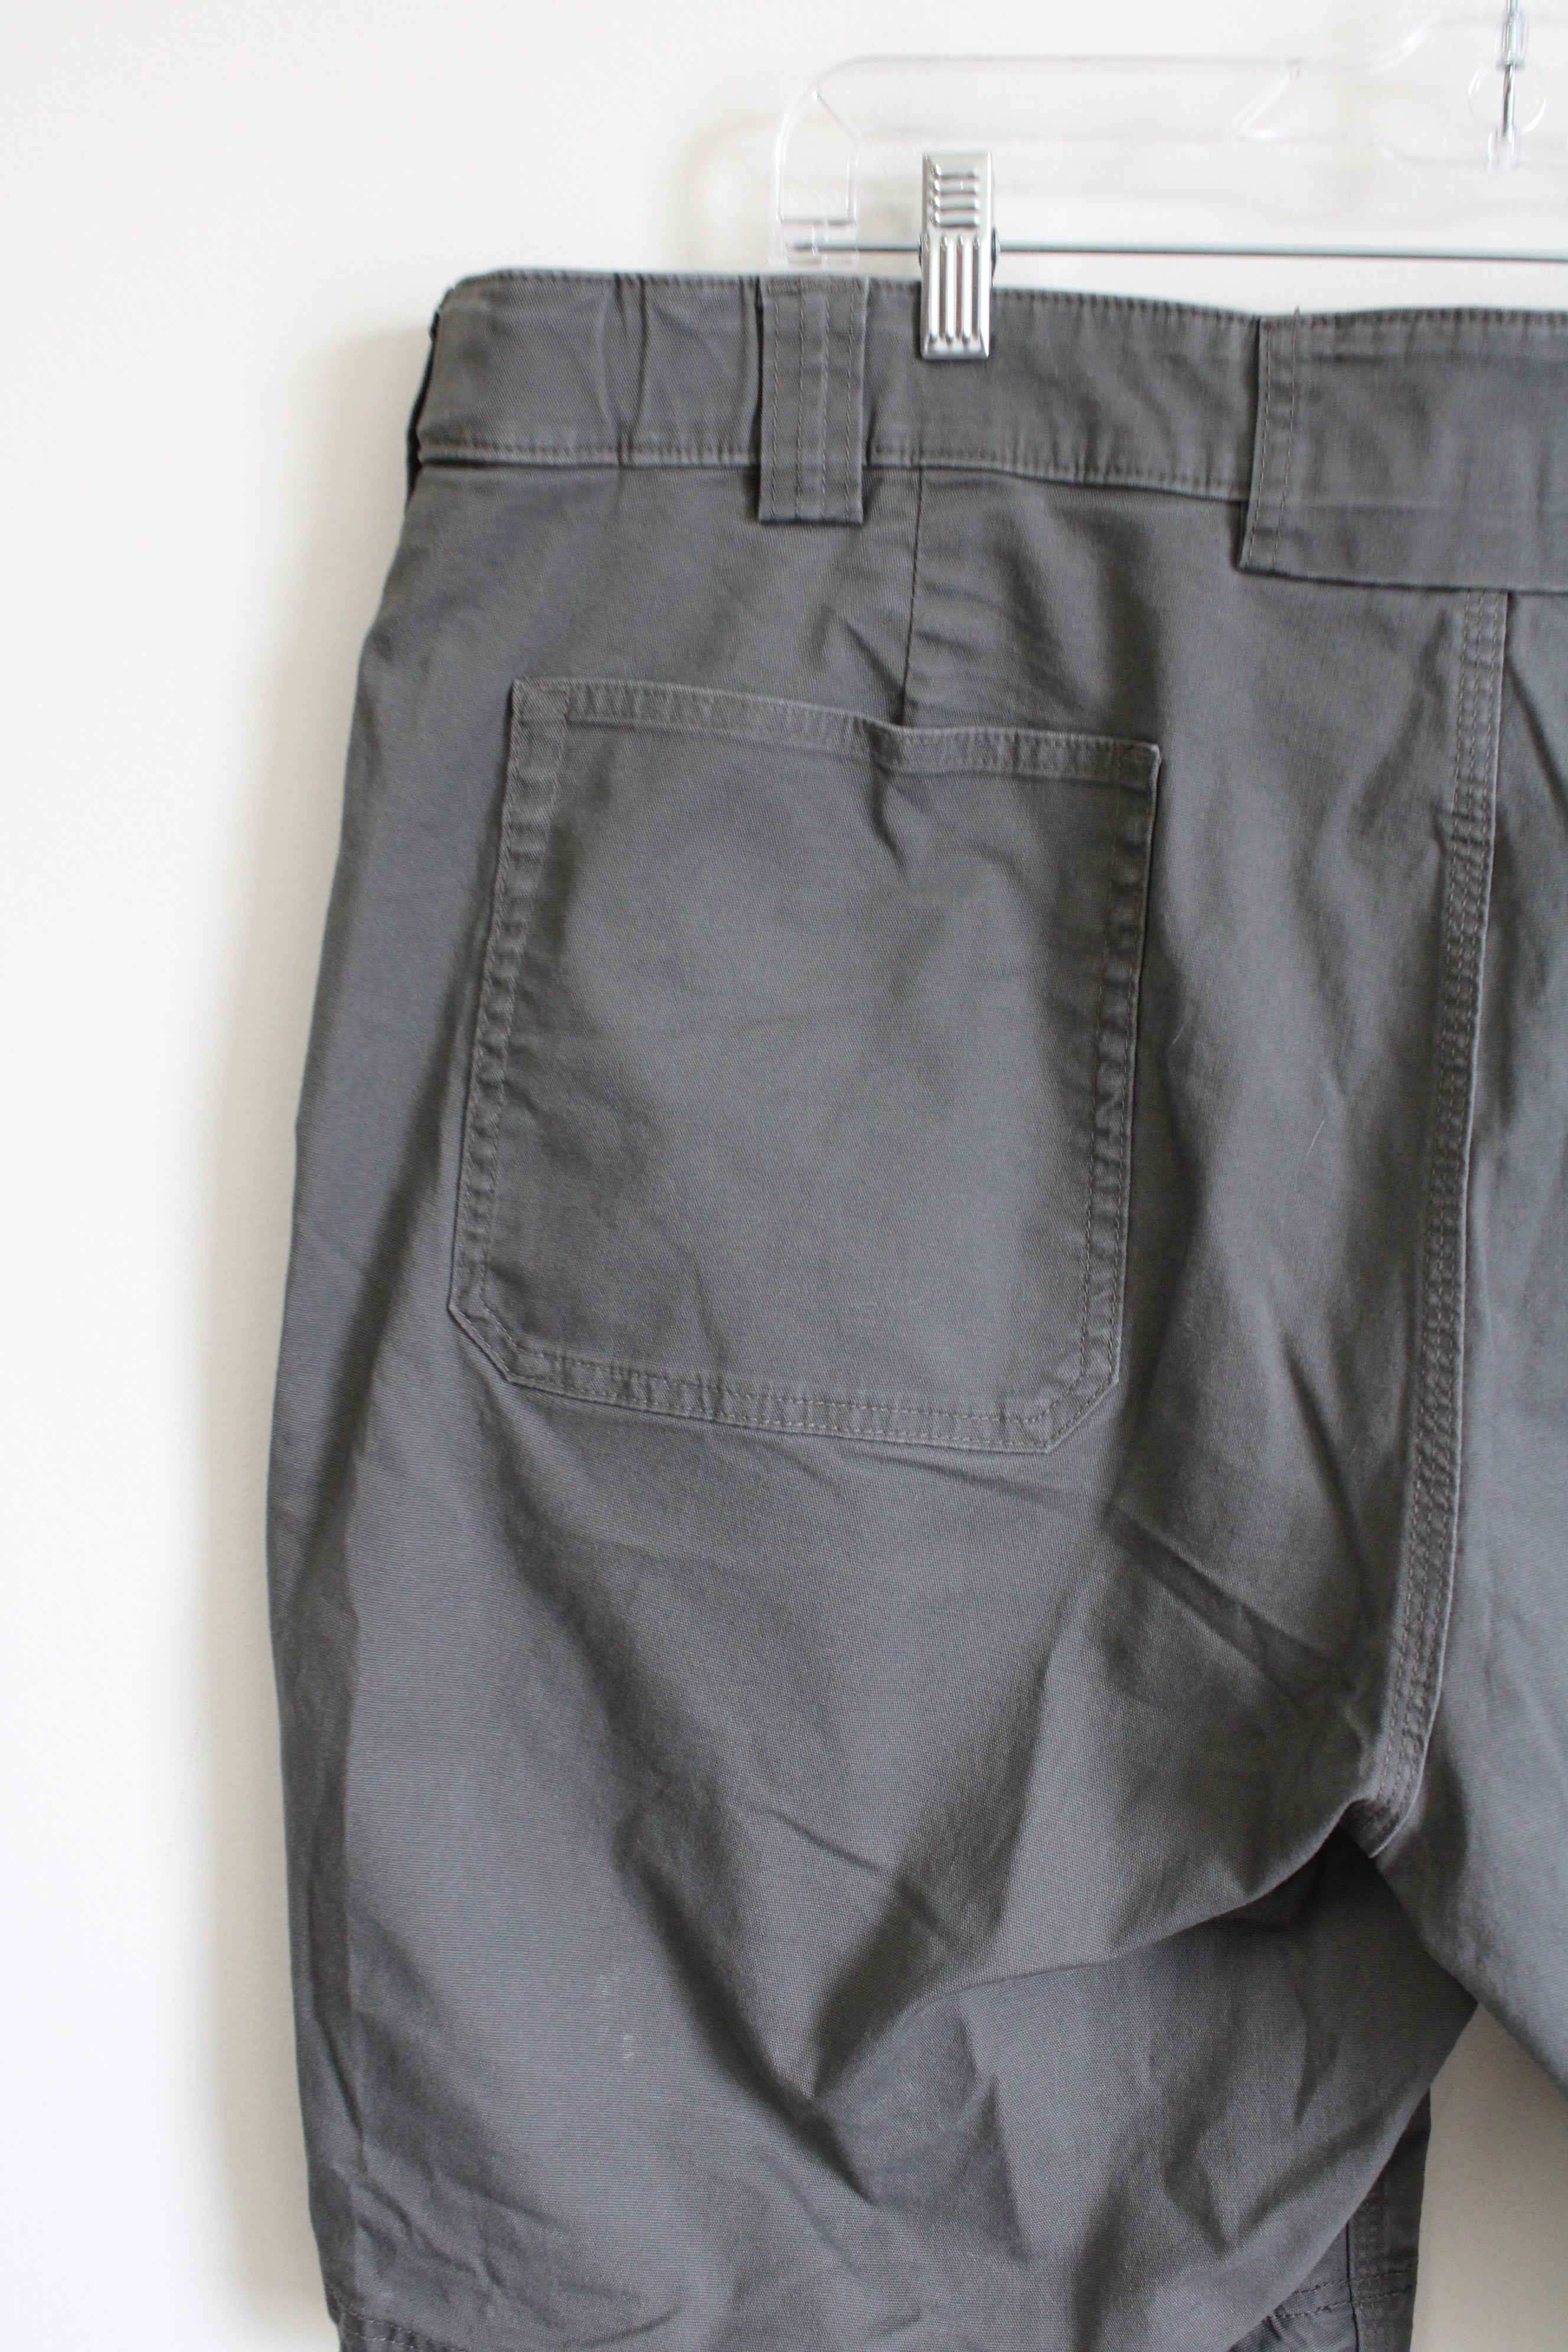 Duluth Trading Co. Cool Max Flex Firehouse Relaxed Fit Gray Cargo Shorts | 44